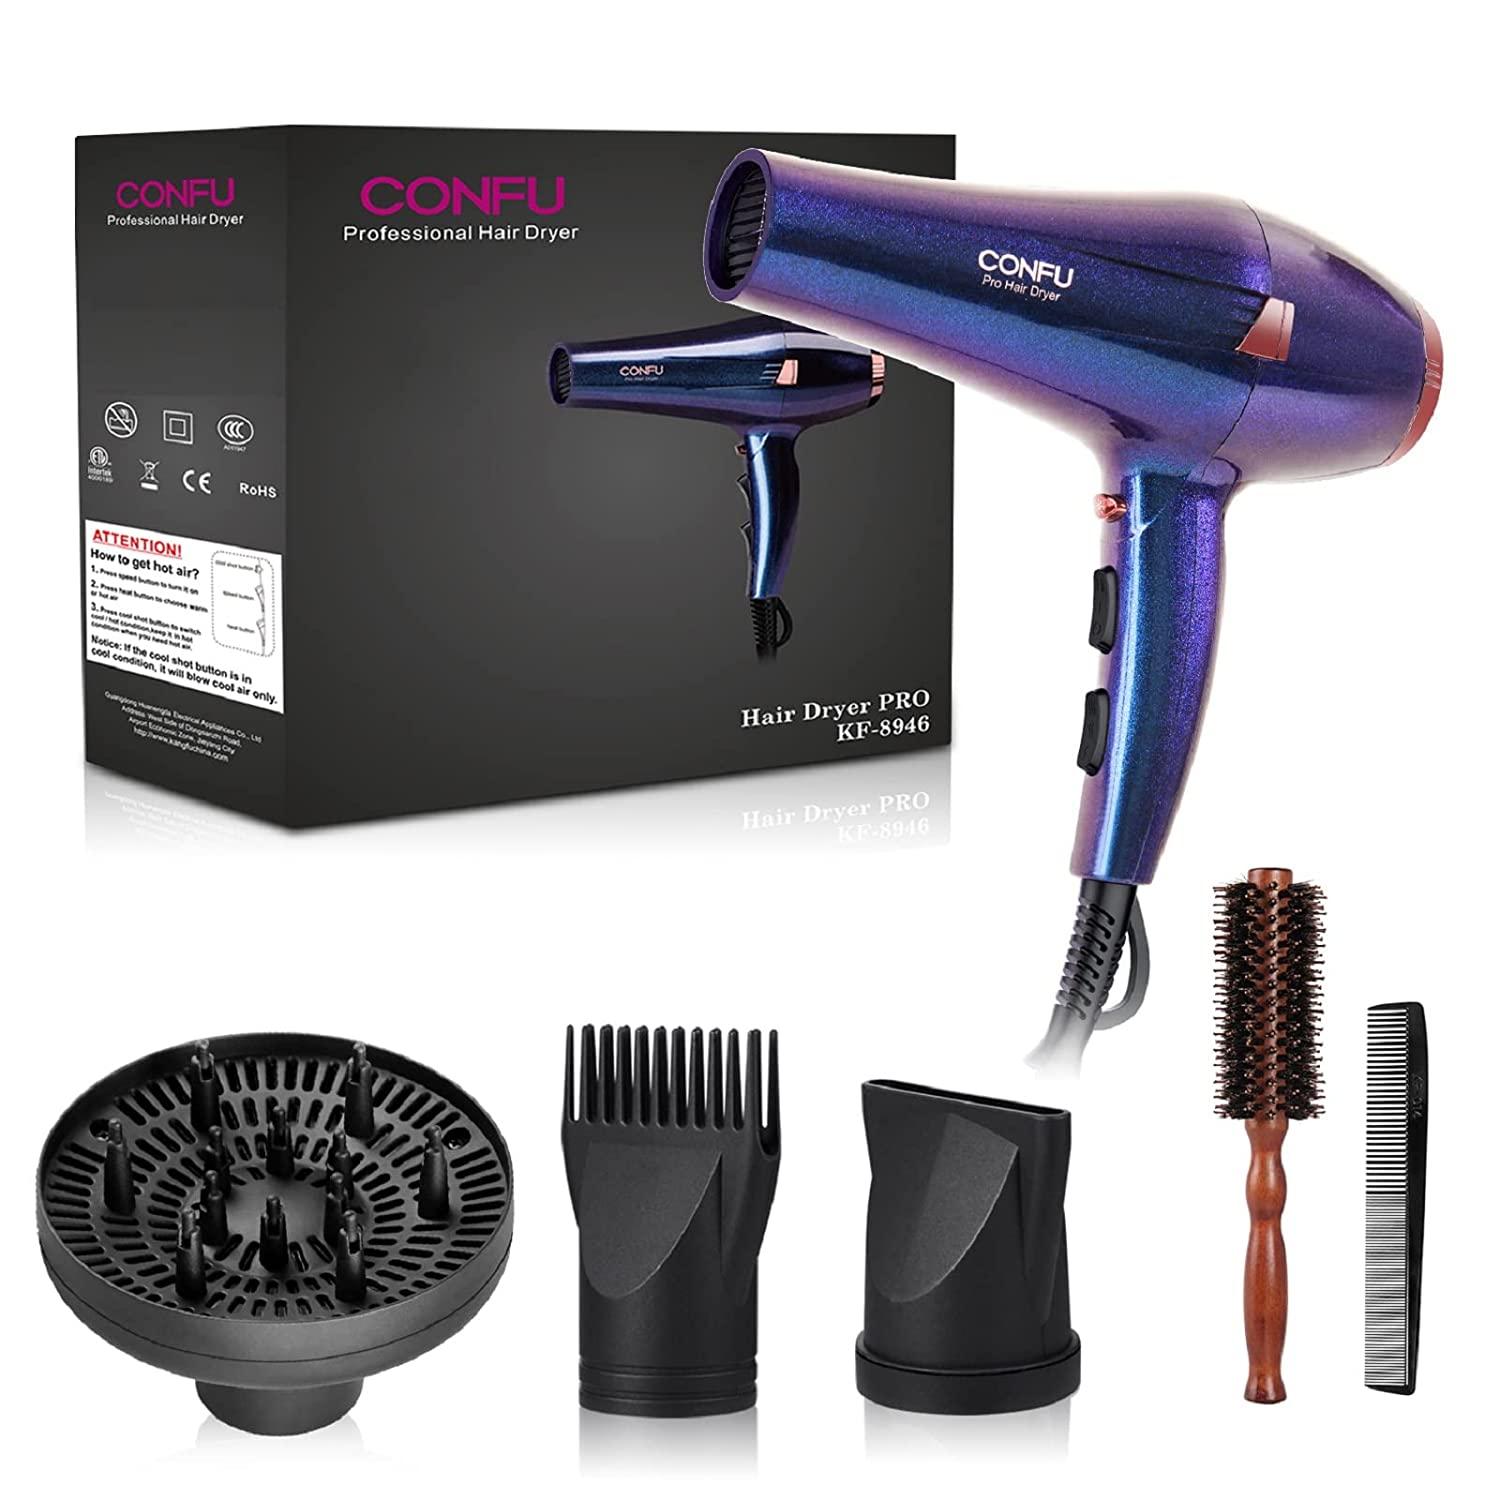 CONFU 2200W Professional Hair Dryer, Compact Blow dryer, Negative ionic Hair  Dryer With Diffuser And Concentrator, For Quick Drying, ETL Certified,  Purple